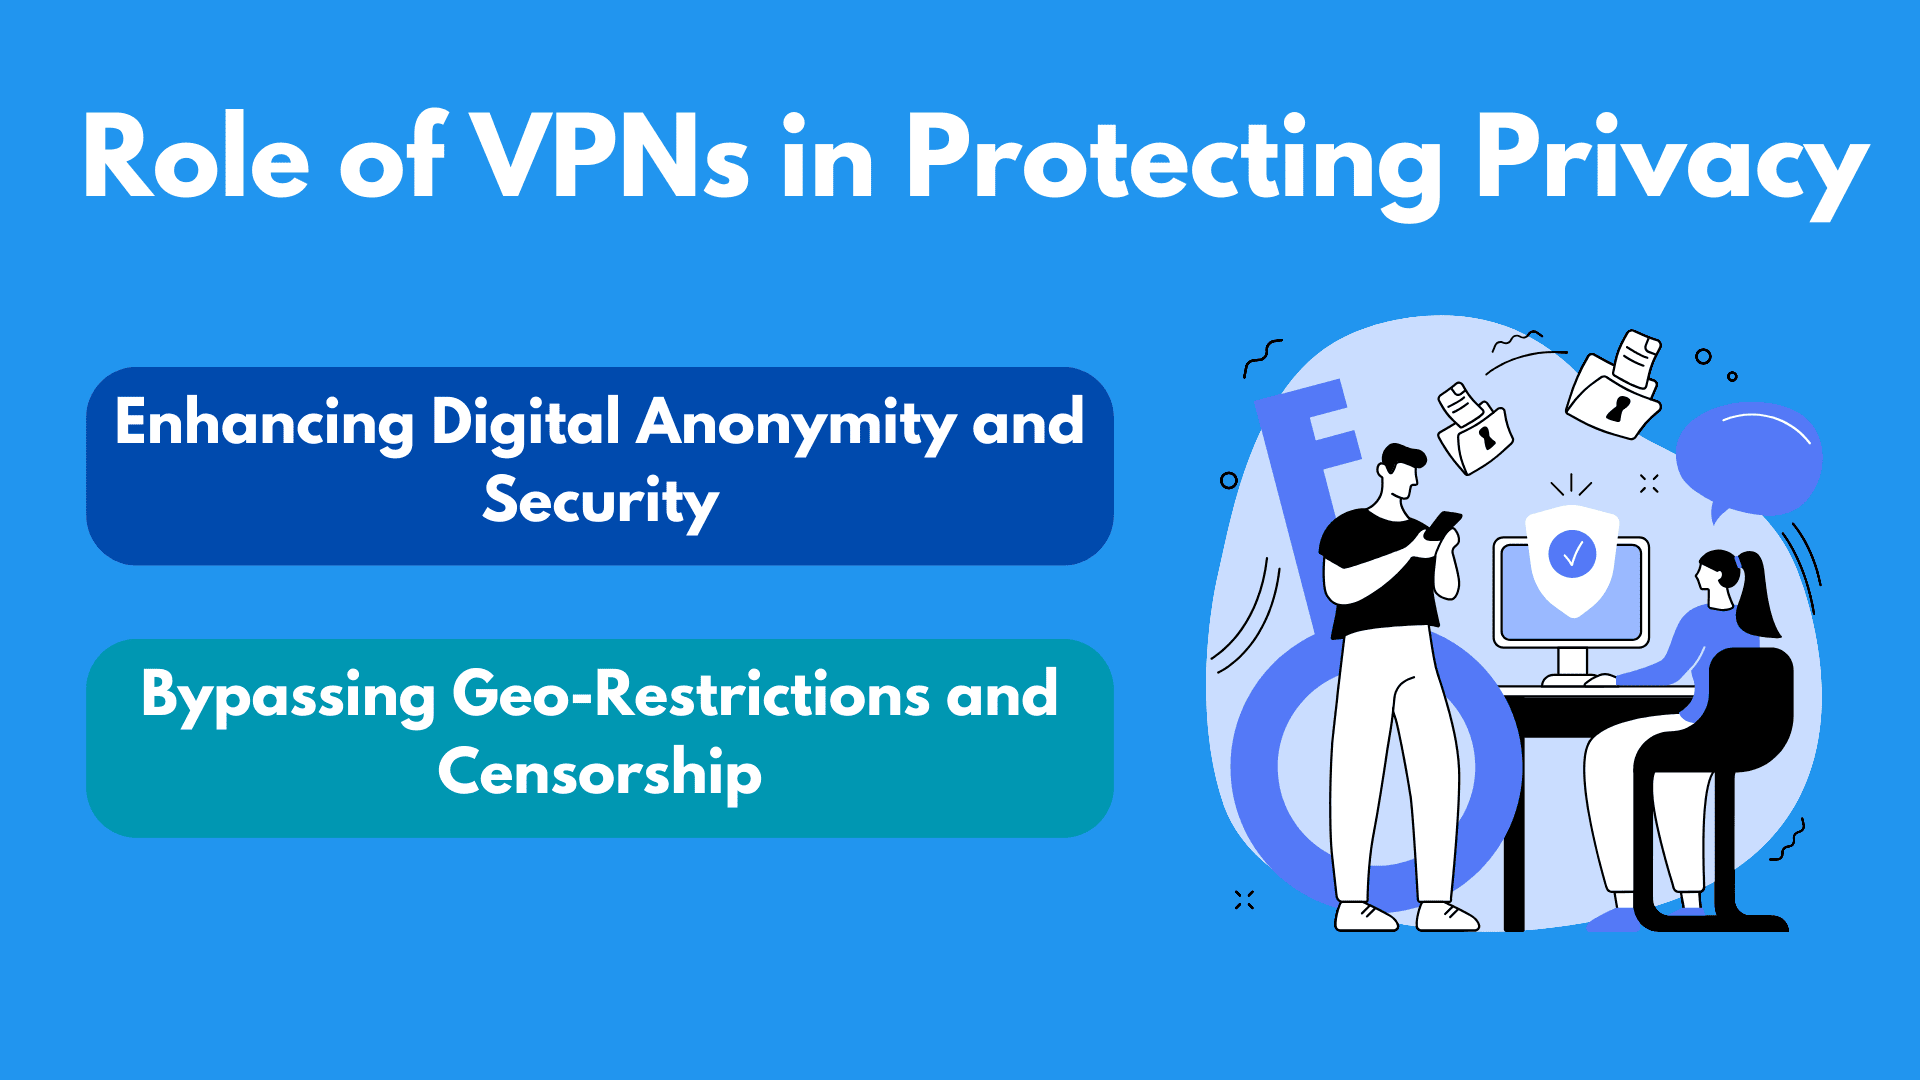 The Role of VPNs in Protecting Privacy